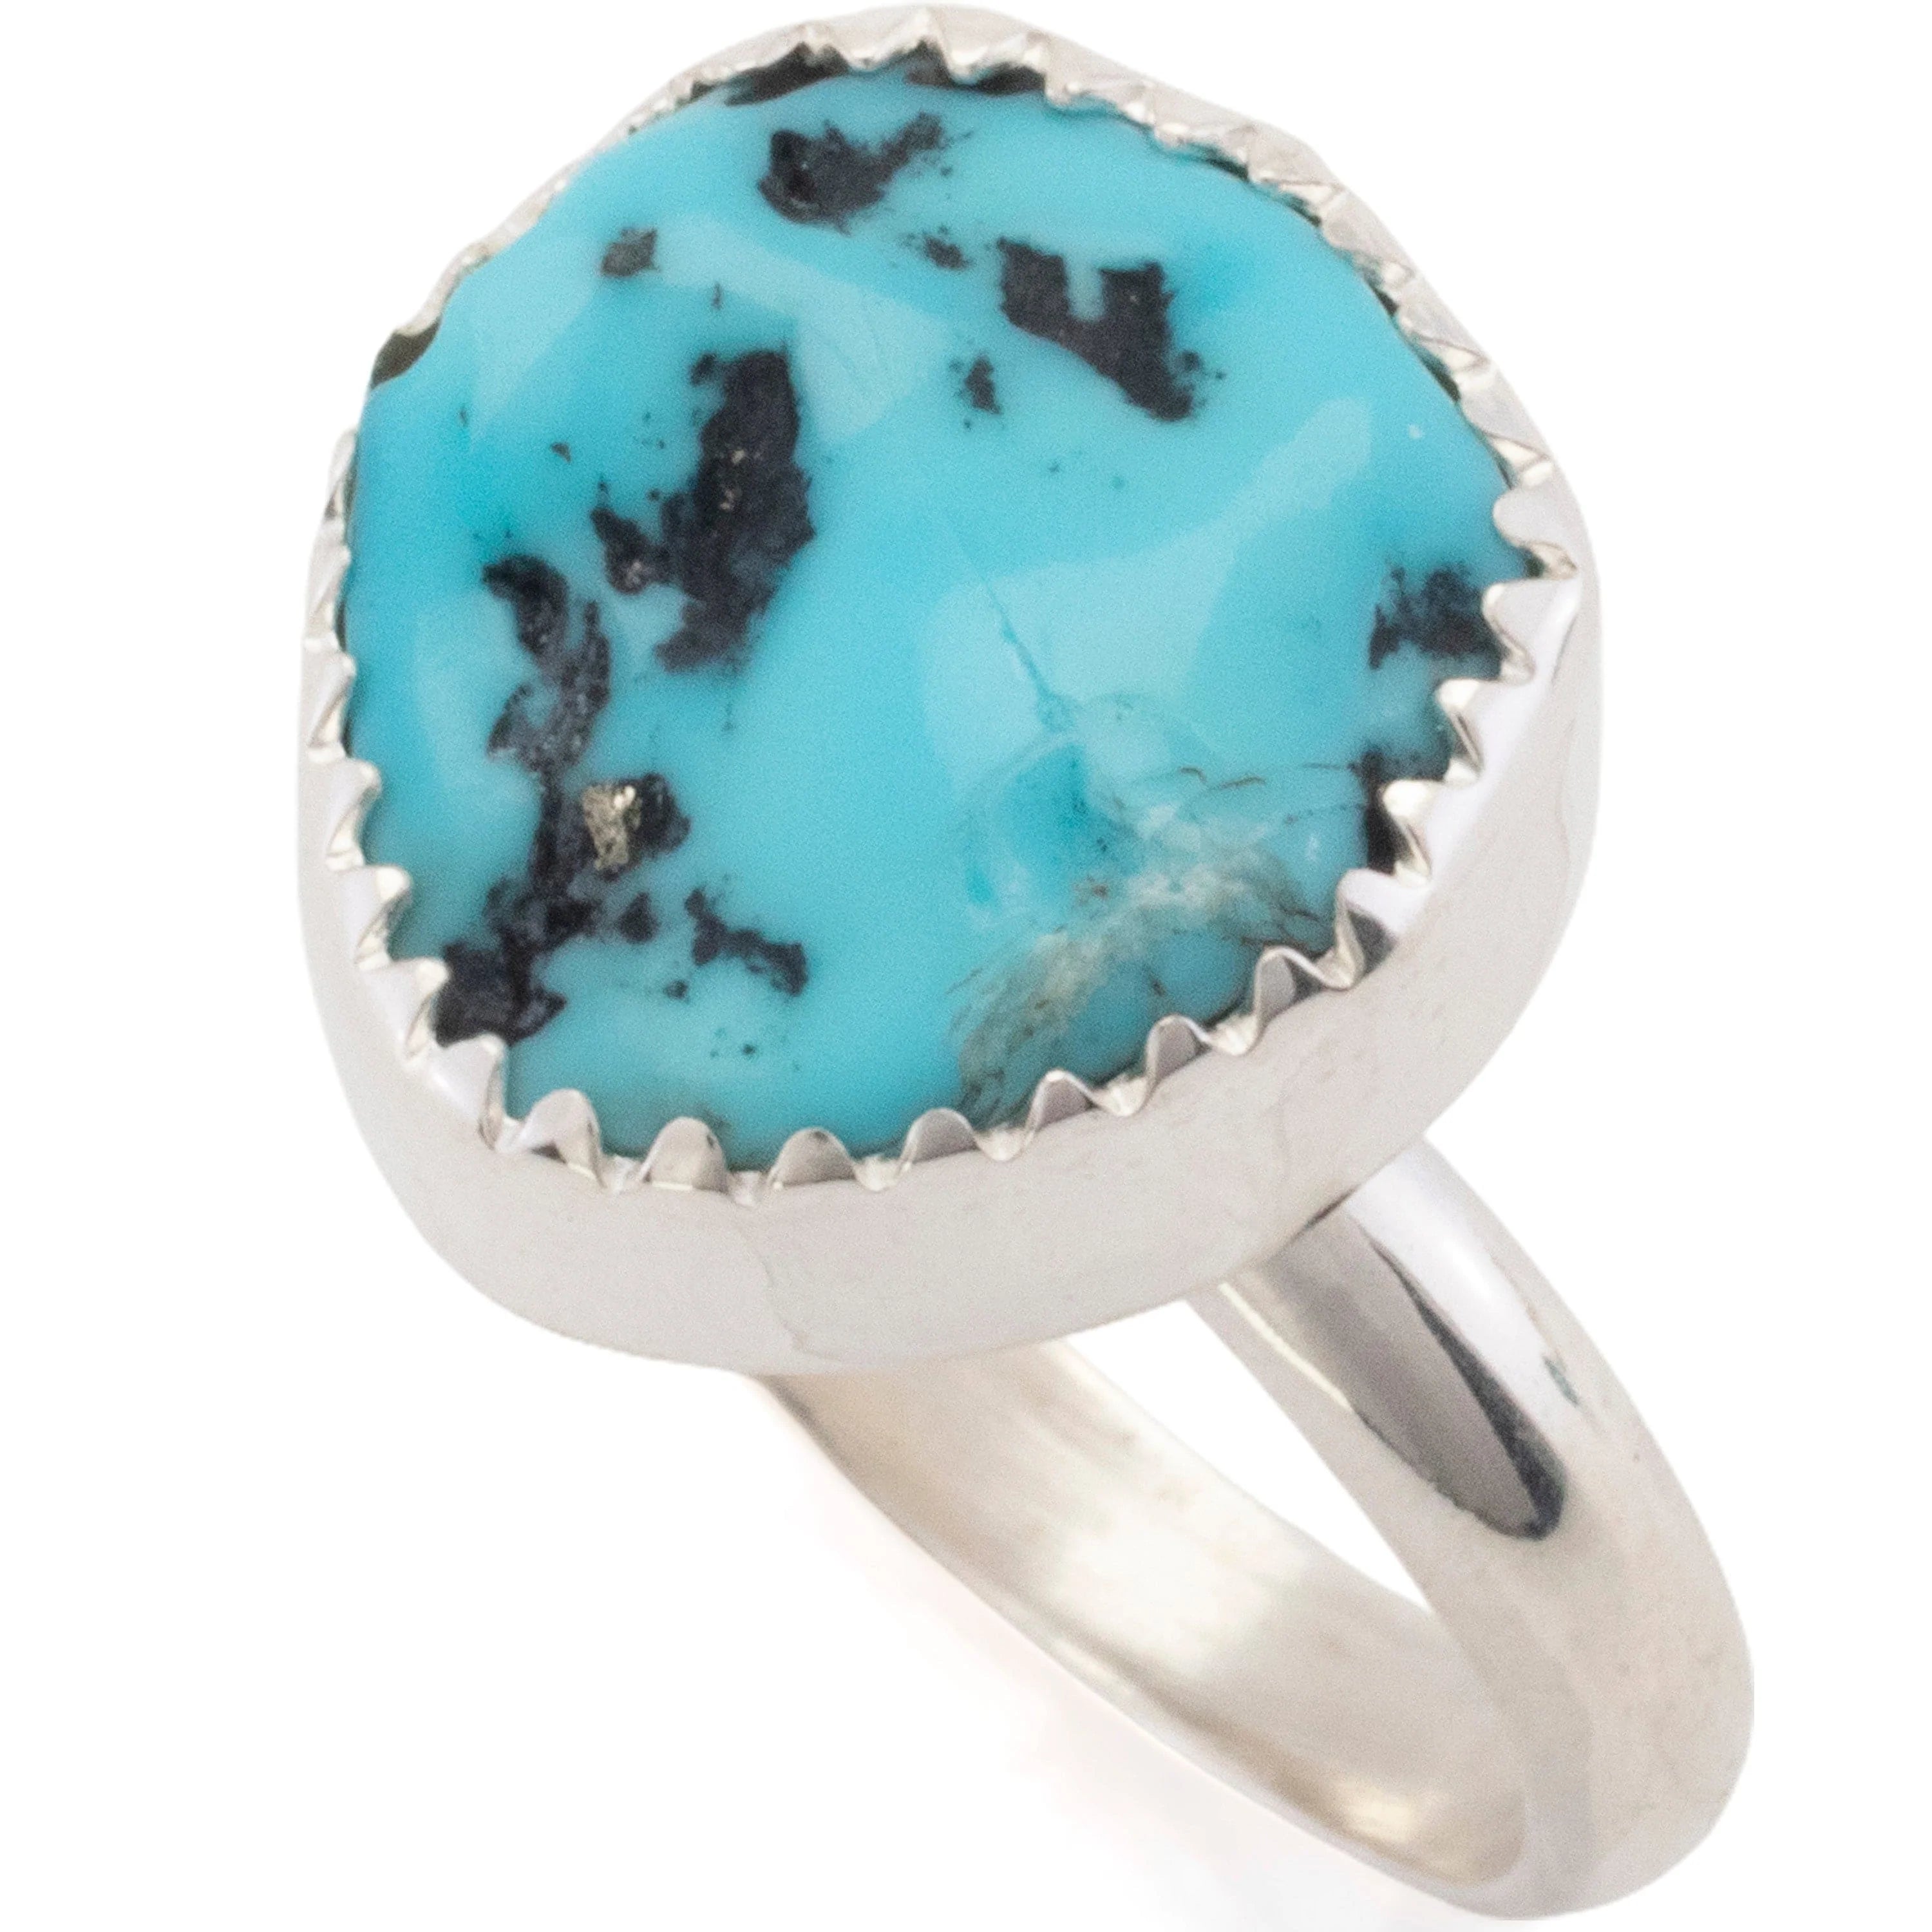 Kalifano Southwest Silver Jewelry Sleeping Beauty Turquoise USA Handmade 925 Sterling Silver Ring